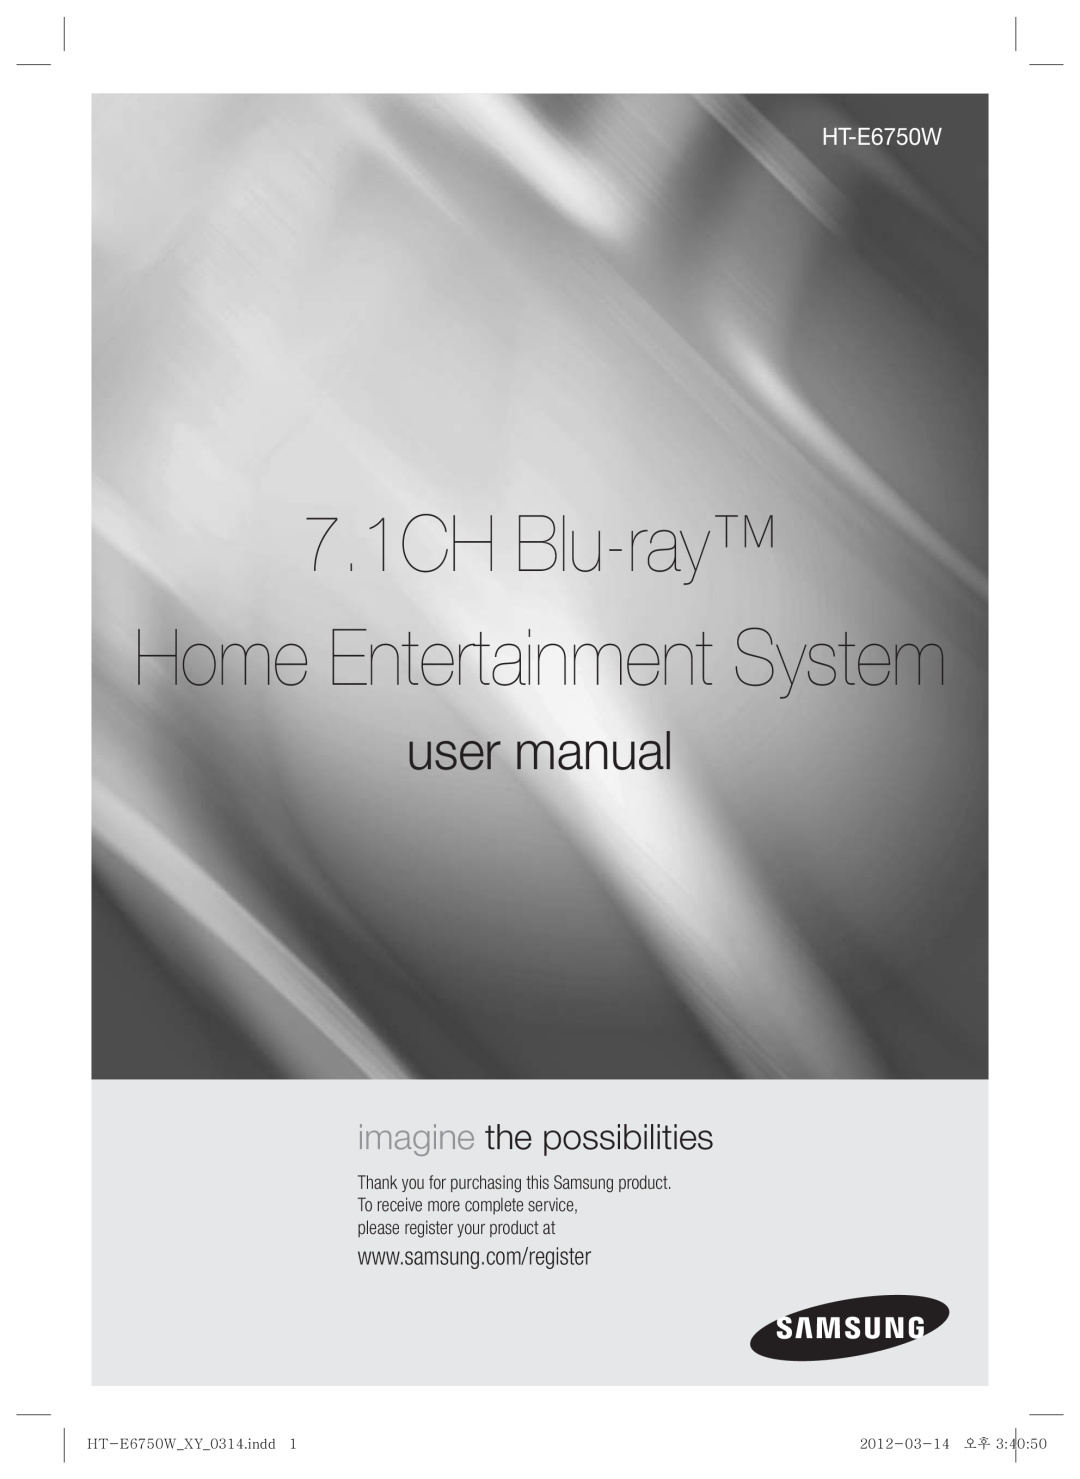 Samsung user manual 7.1CH Blu-ray, Home Entertainment System, imagine the possibilities, HT-E6750W_XY_0314.indd1 